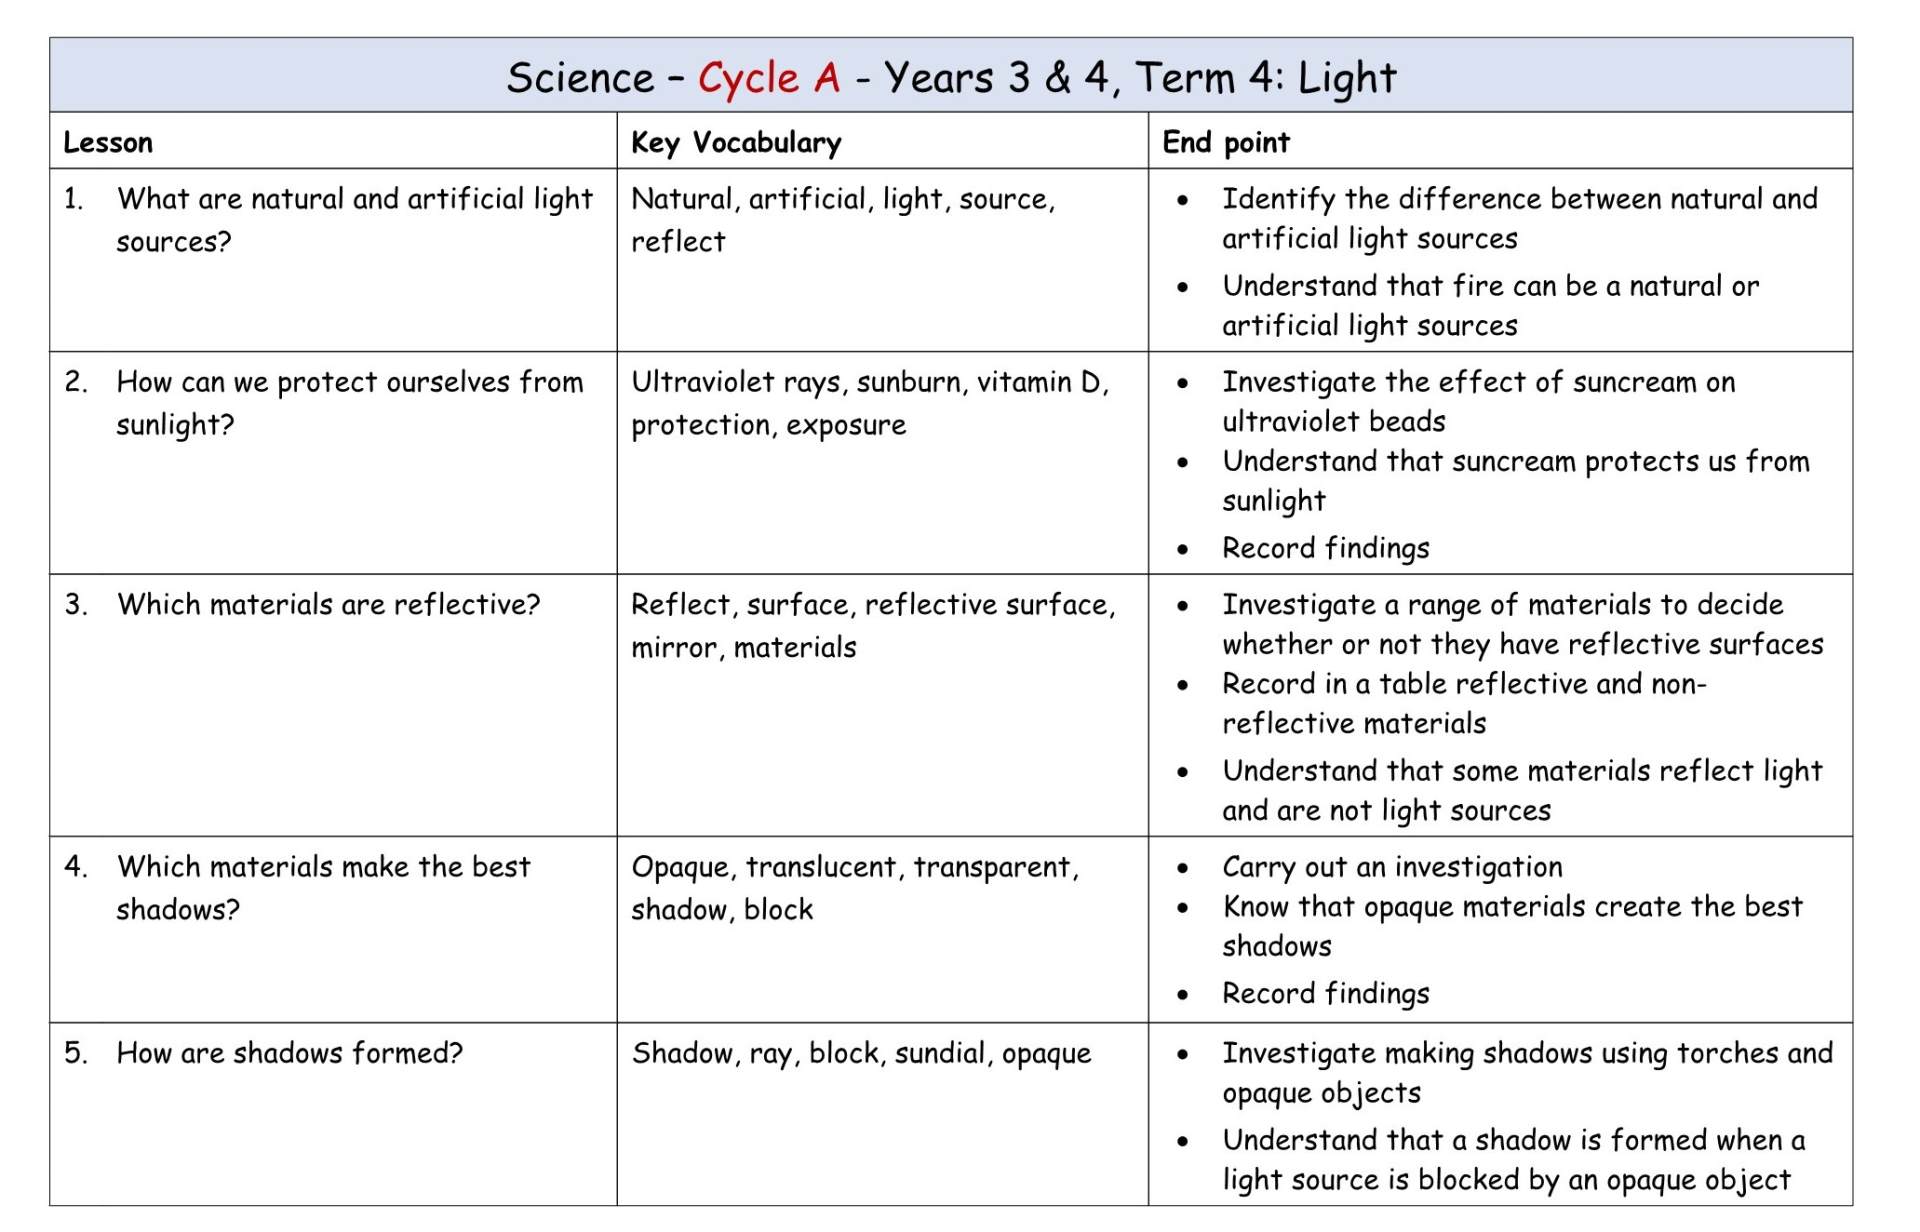 Science Y3-4 Cycle A MTP T4